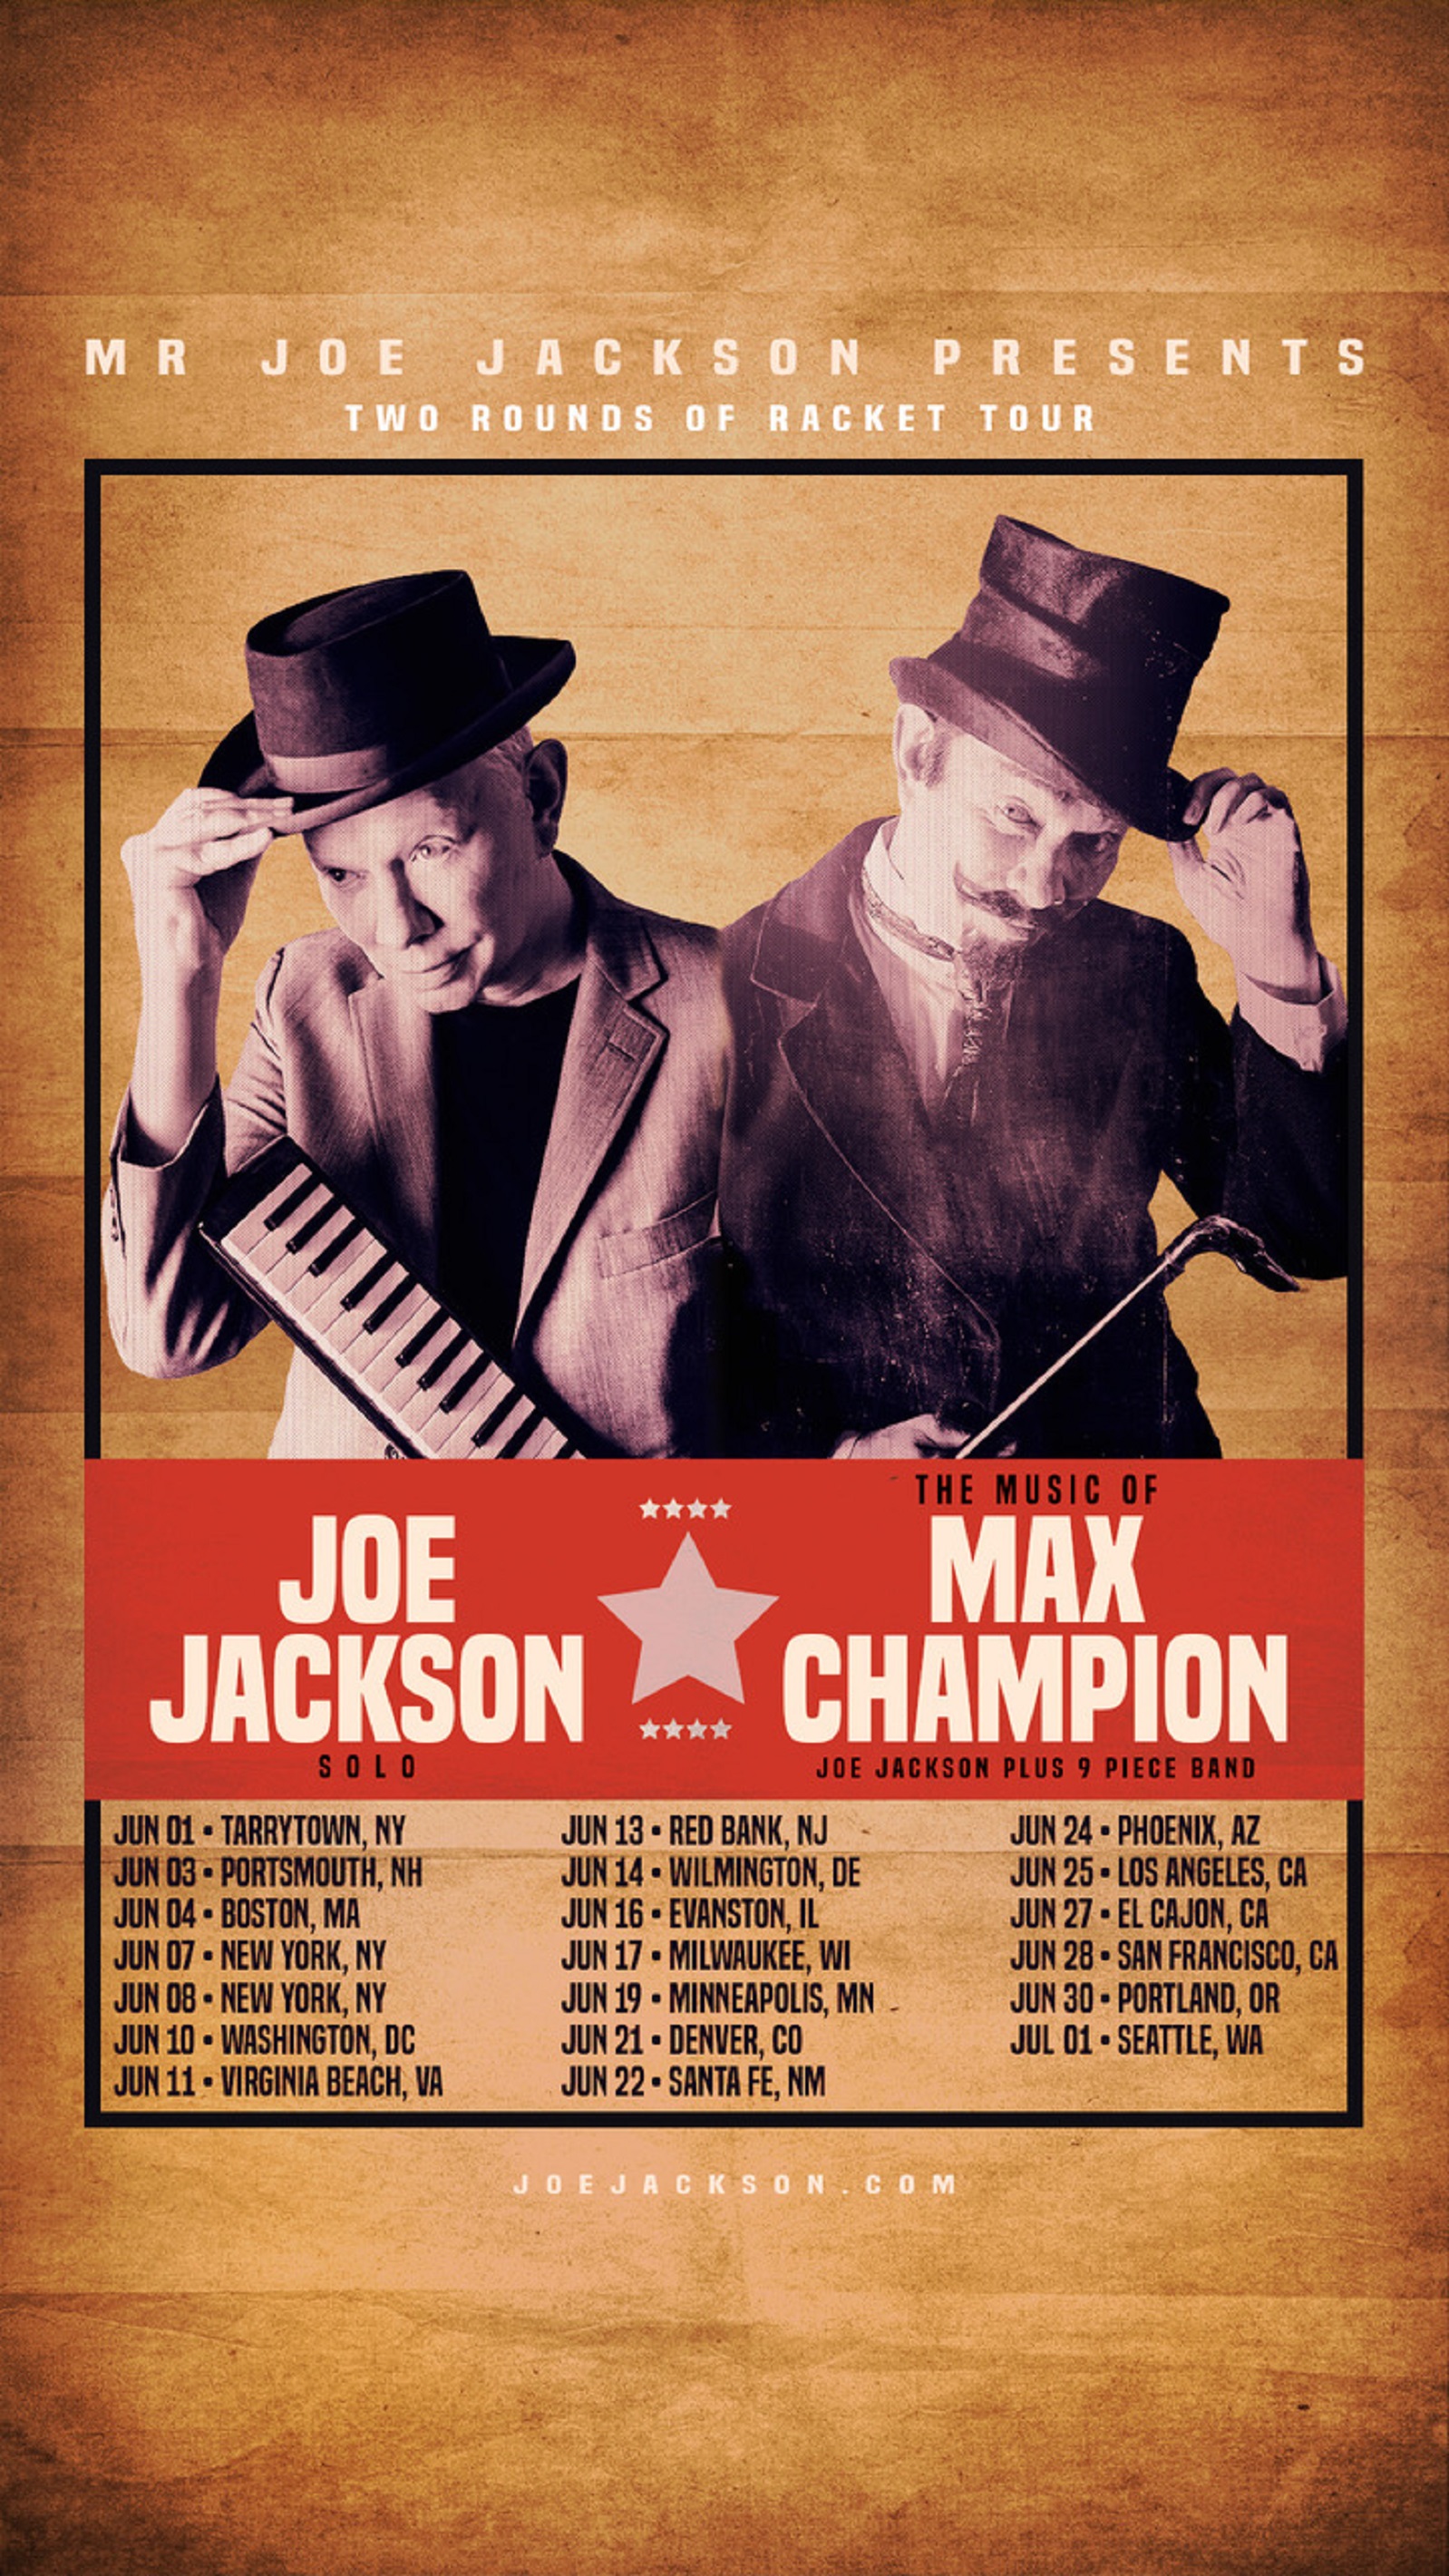 Mr. Joe Jackson Presents "The Two Rounds Of Racket Tour" Appearing in